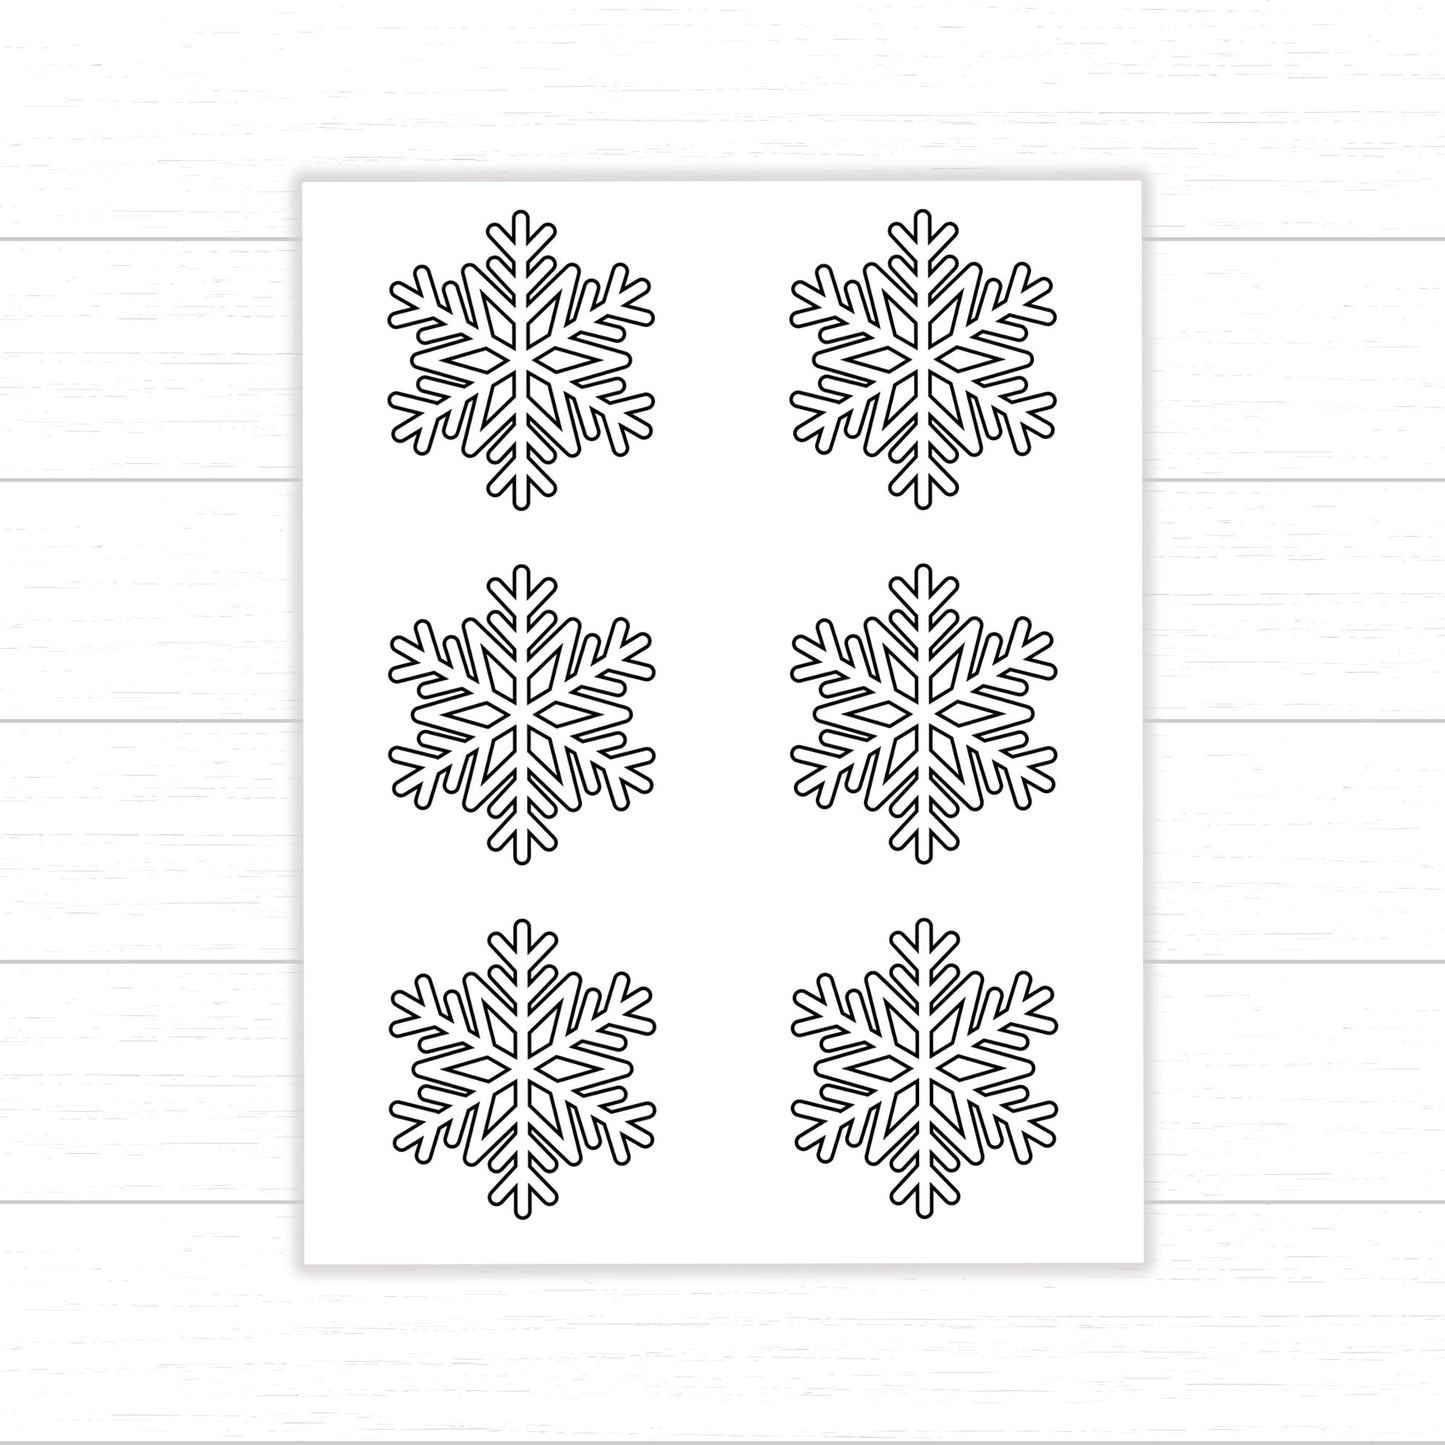 Snowflake Coloring Pages, Snowflakes to Color, Winter Snowflakes, Winter Activities for Kids, Printable Snowflakes, Snowflake Crafts